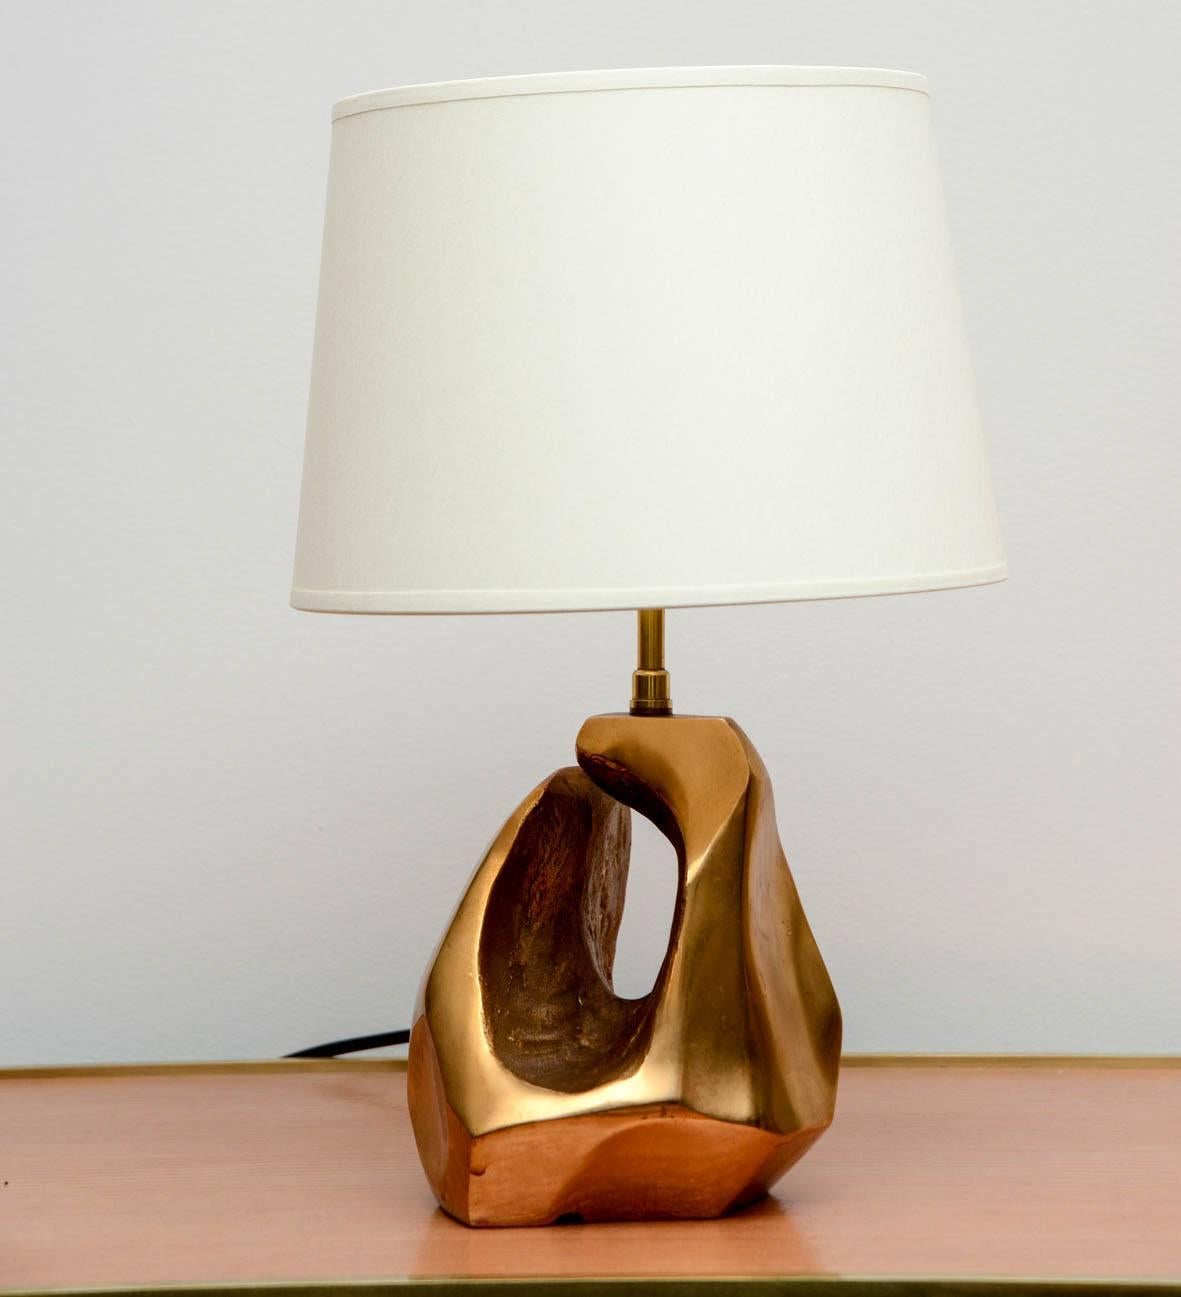 Lamp in bronze, free-form
Signed by Michel Jaubert
circa 1970.